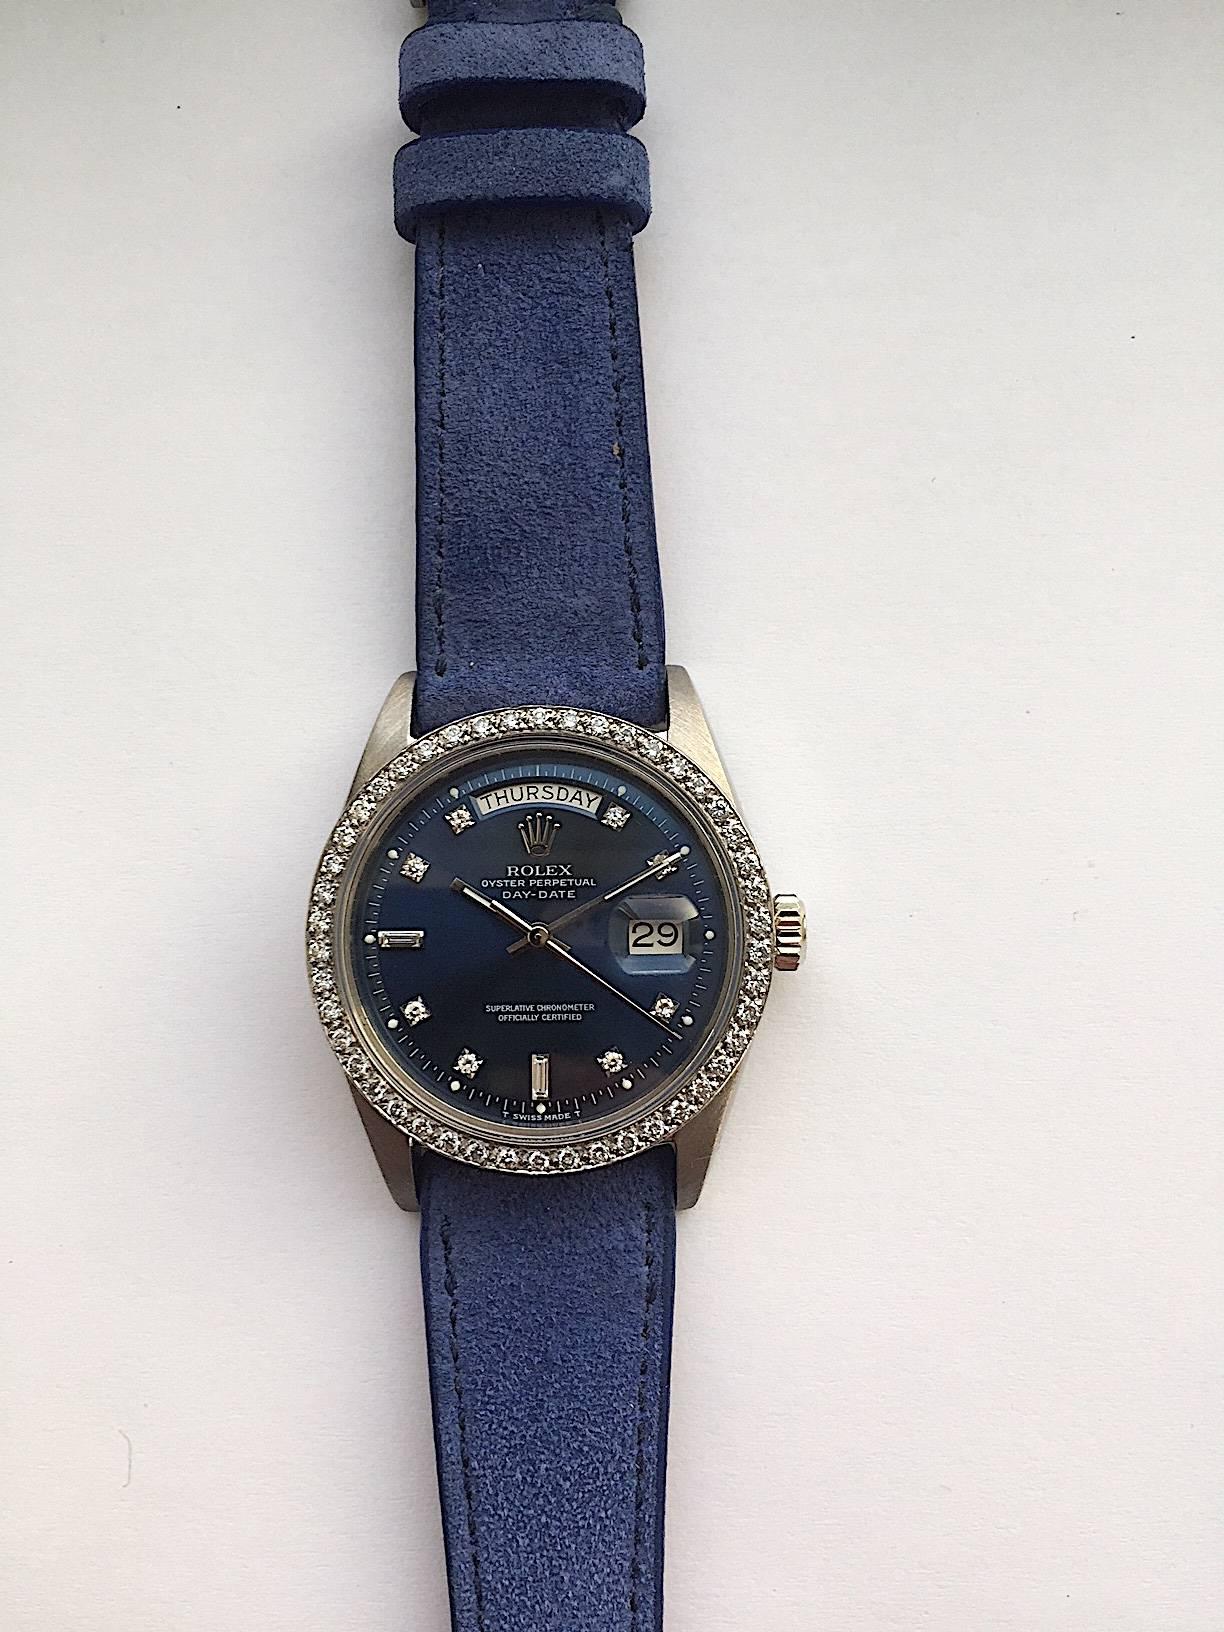 Rolex 18K White Gold Oyster Perpetual Day-Date Watch
Beautiful Rolex Factory Blue Diamond Dial with Matching Factory 18K White Gold Diamond Bezel
Rare Rolex 18K White Gold Model from the 1970s
18K White Gold Case
36mm in size 
Features Rolex